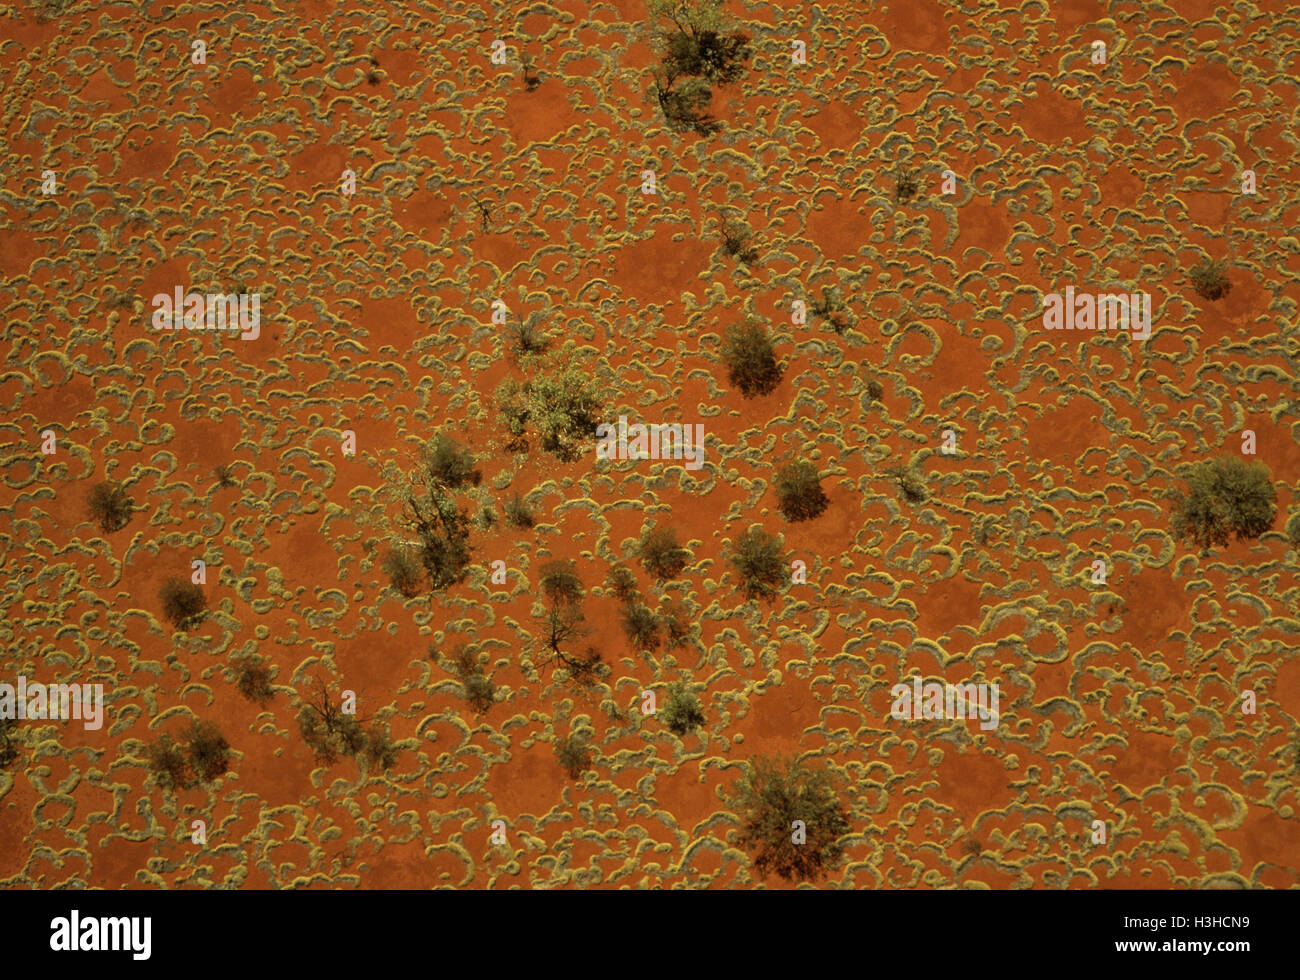 Spinifex carpet, aerial view  showing patterns of spinifex grass, red sand and desert oaks. Pilbara region, Western Australia, Australia Stock Photo